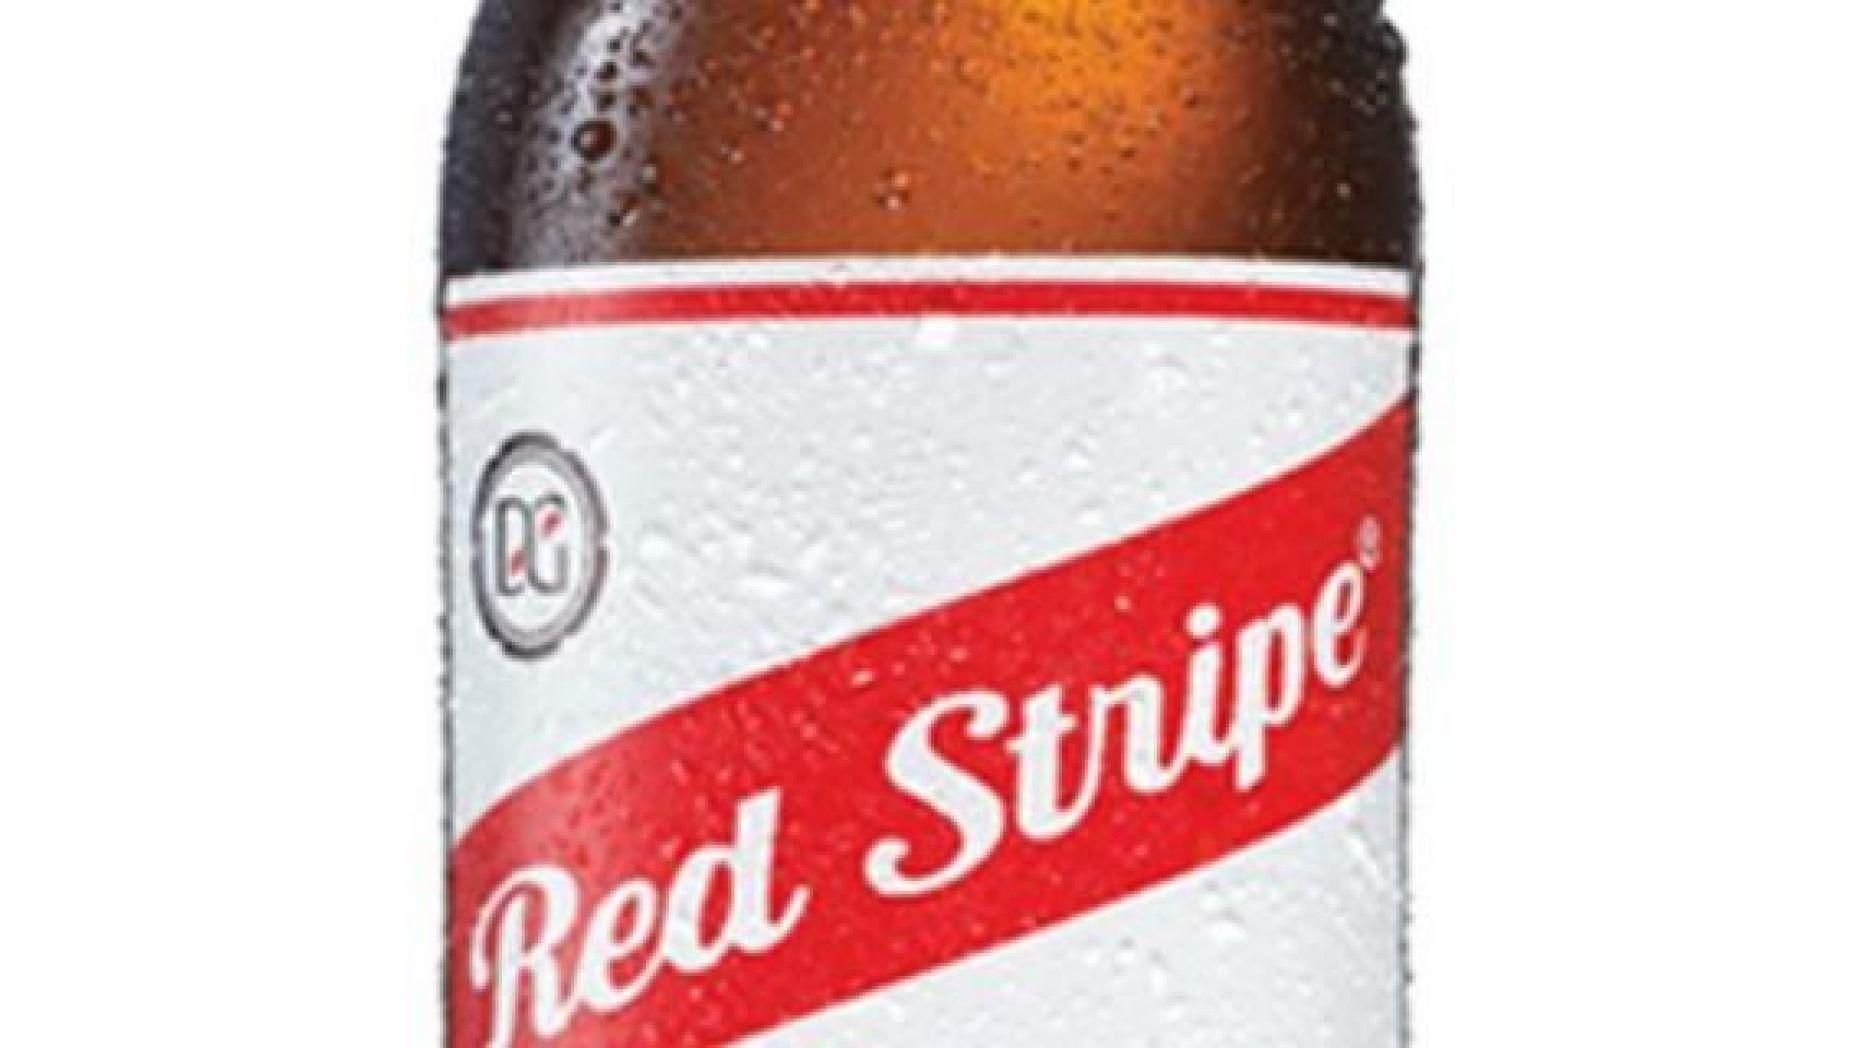 Red Stripe Beer Logo - Red Stripe sued over misleading 'Jamaican' beer claims | Fox News